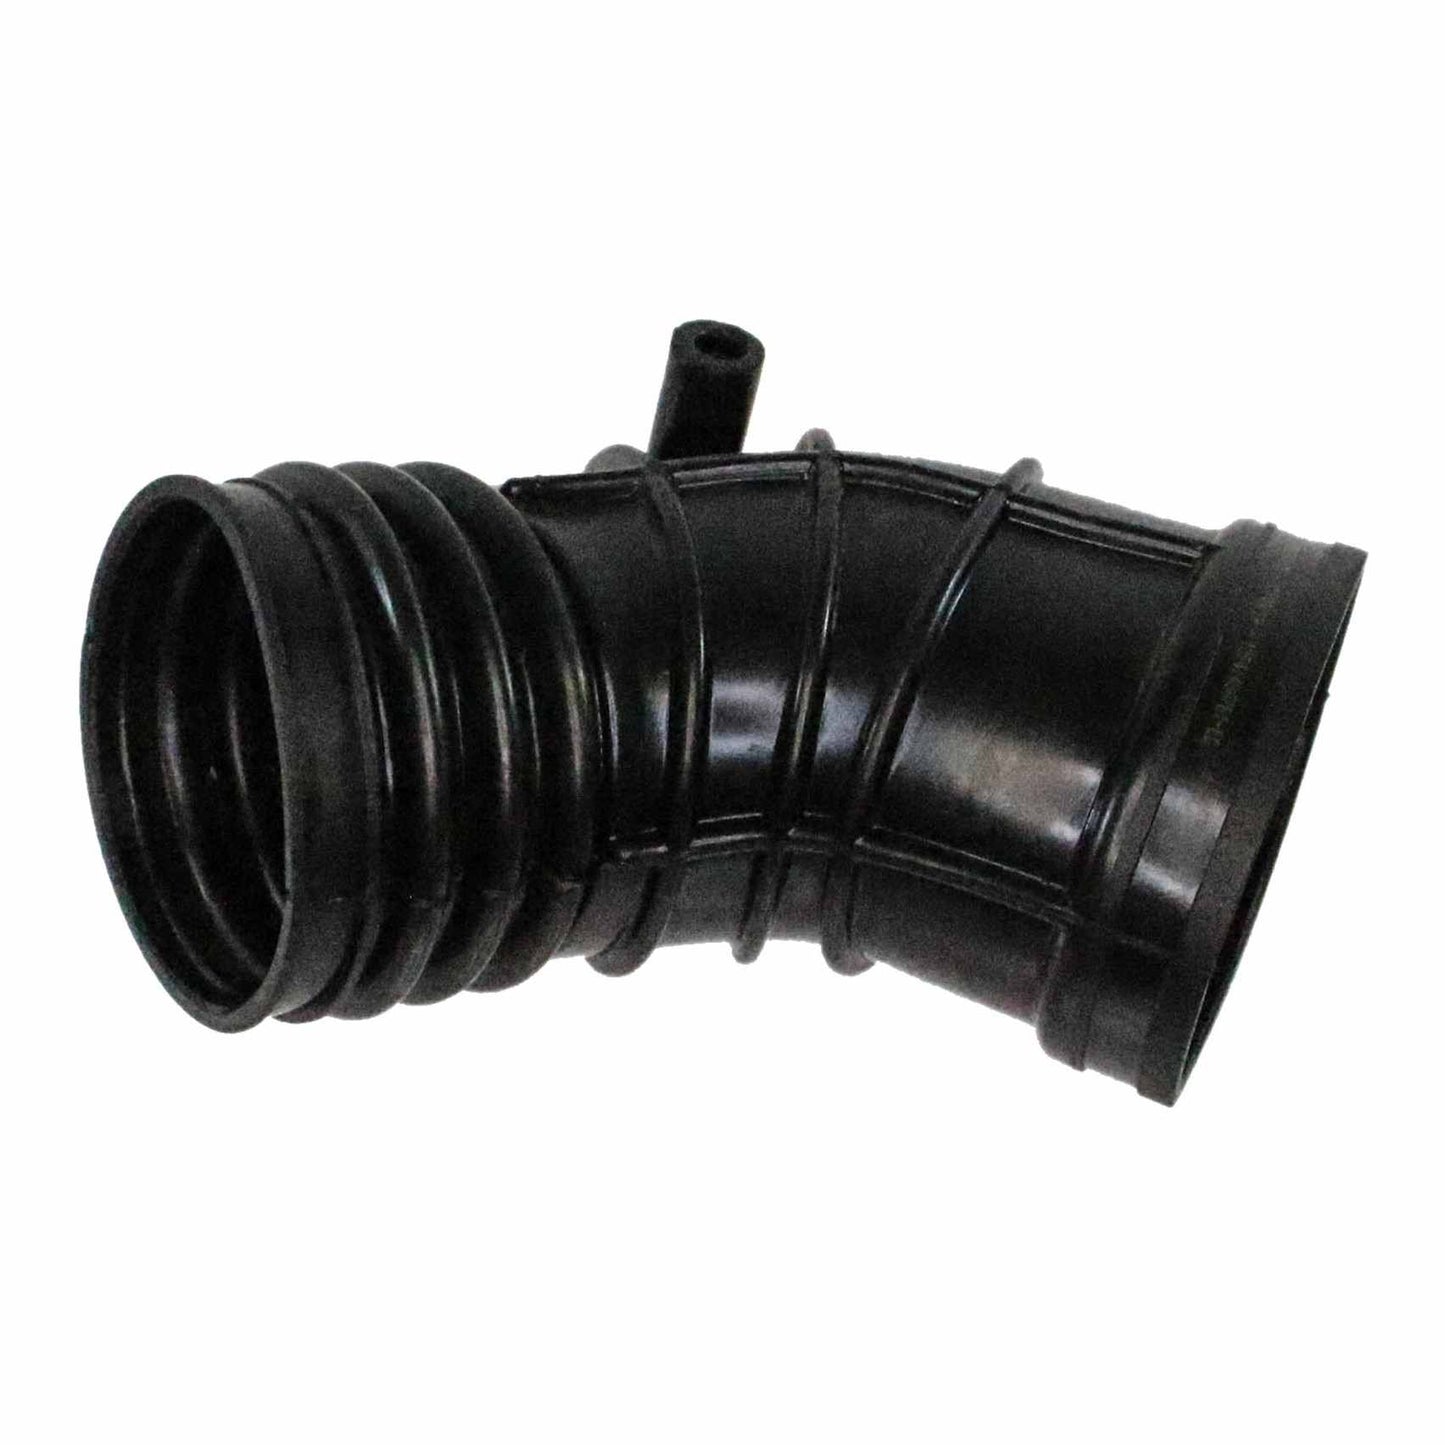 Back View of Fuel Injection Air Flow Meter Boot CRP ABV0136